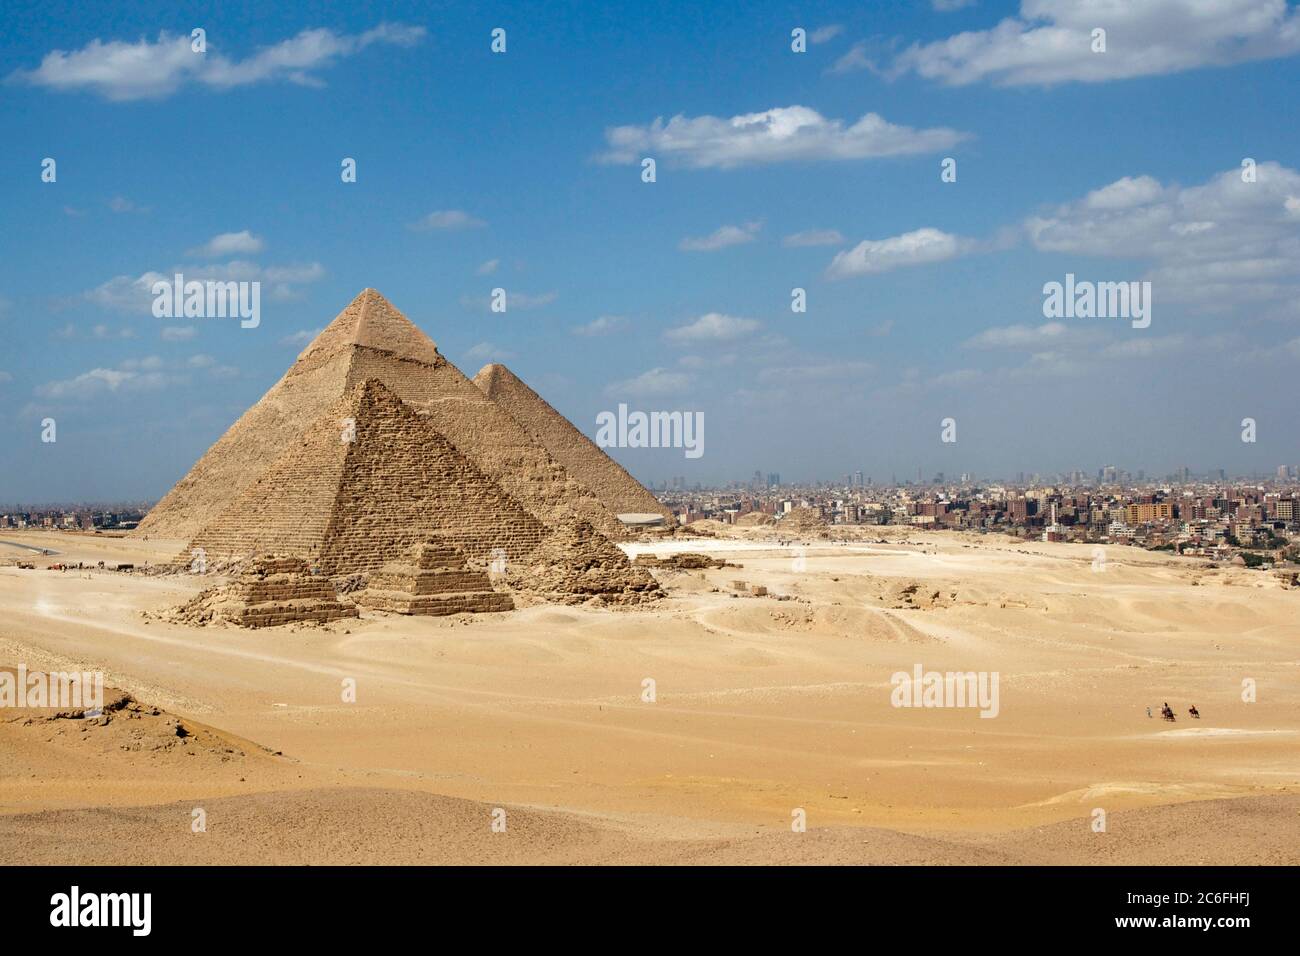 Great Pyramids of Giza set against a bright blue sky and golden yellow desert sands but with the encroaching city of Cairo in the background Stock Photo